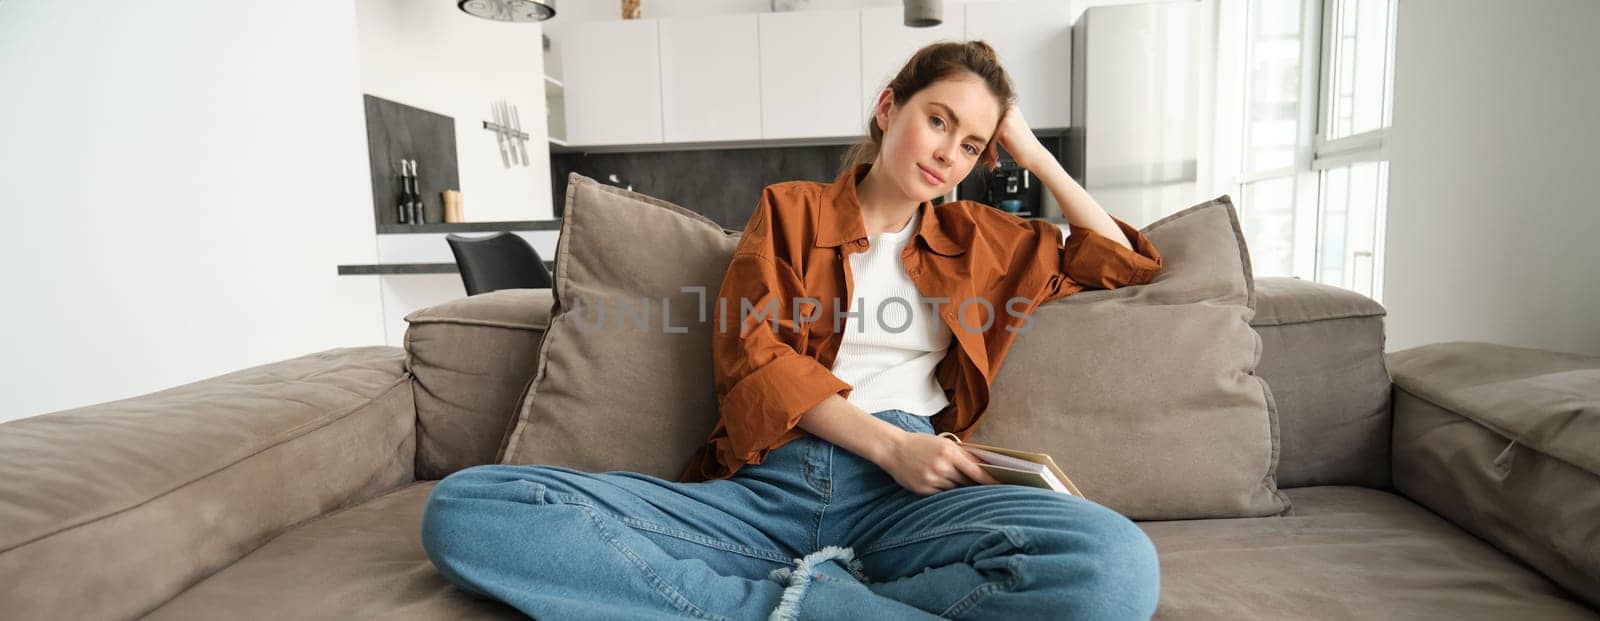 Lifestyle concept. Young smiling brunette woman, sitting at home on sofa, resting on couch, looking at camera with relaxed expression.